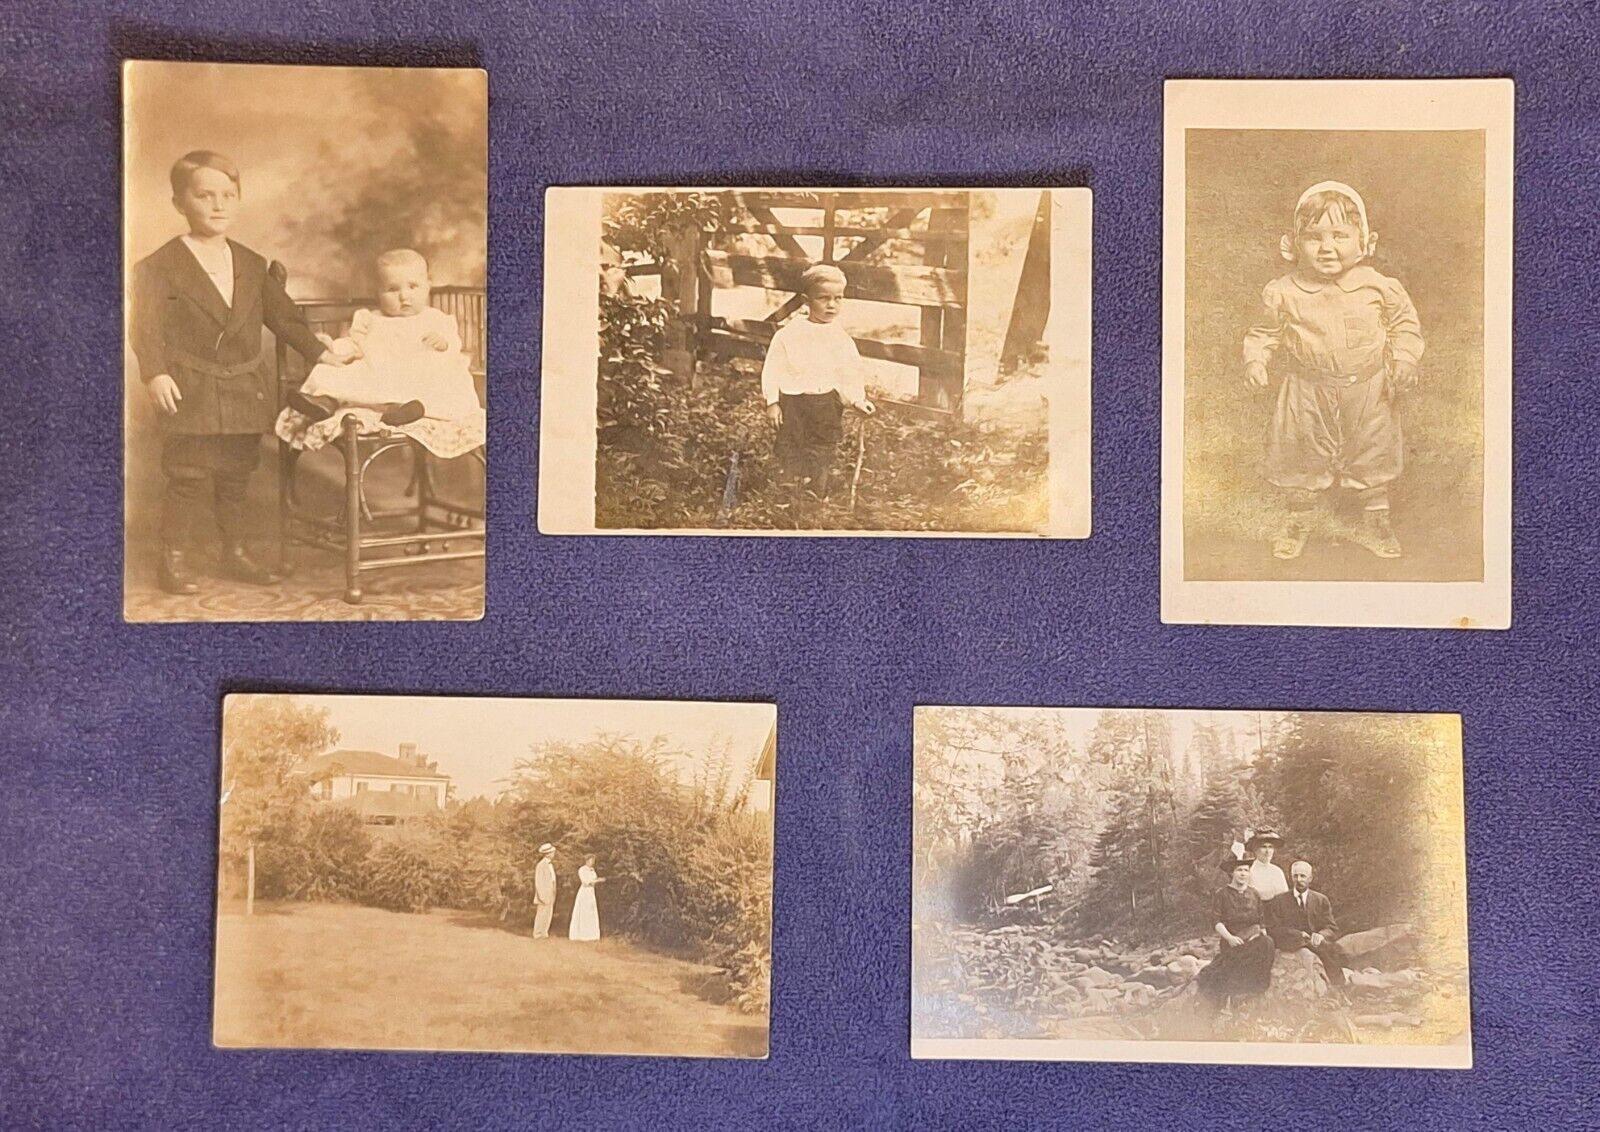 Lot of 5 RPPC Real Photo Postcards of Children & Families - B&W Photos